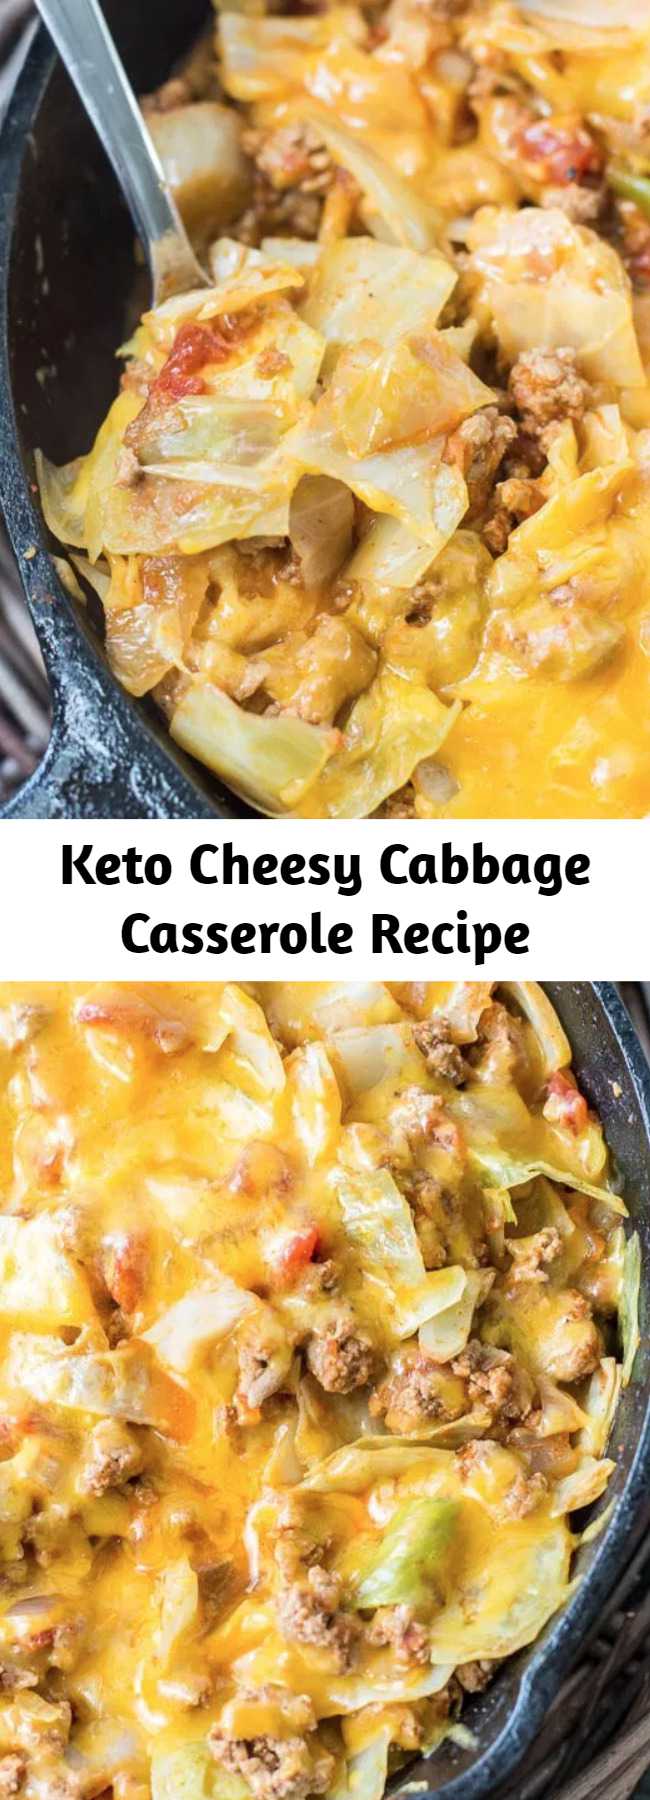 Keto Cheesy Cabbage Casserole Recipe - This Keto One Pan Cabbage Casserole is a low carb, easy dinner ready in 30 minutes! The perfect easy keto dinner! Under 9 net carbs per serving! #keto #lowcarb #onepan